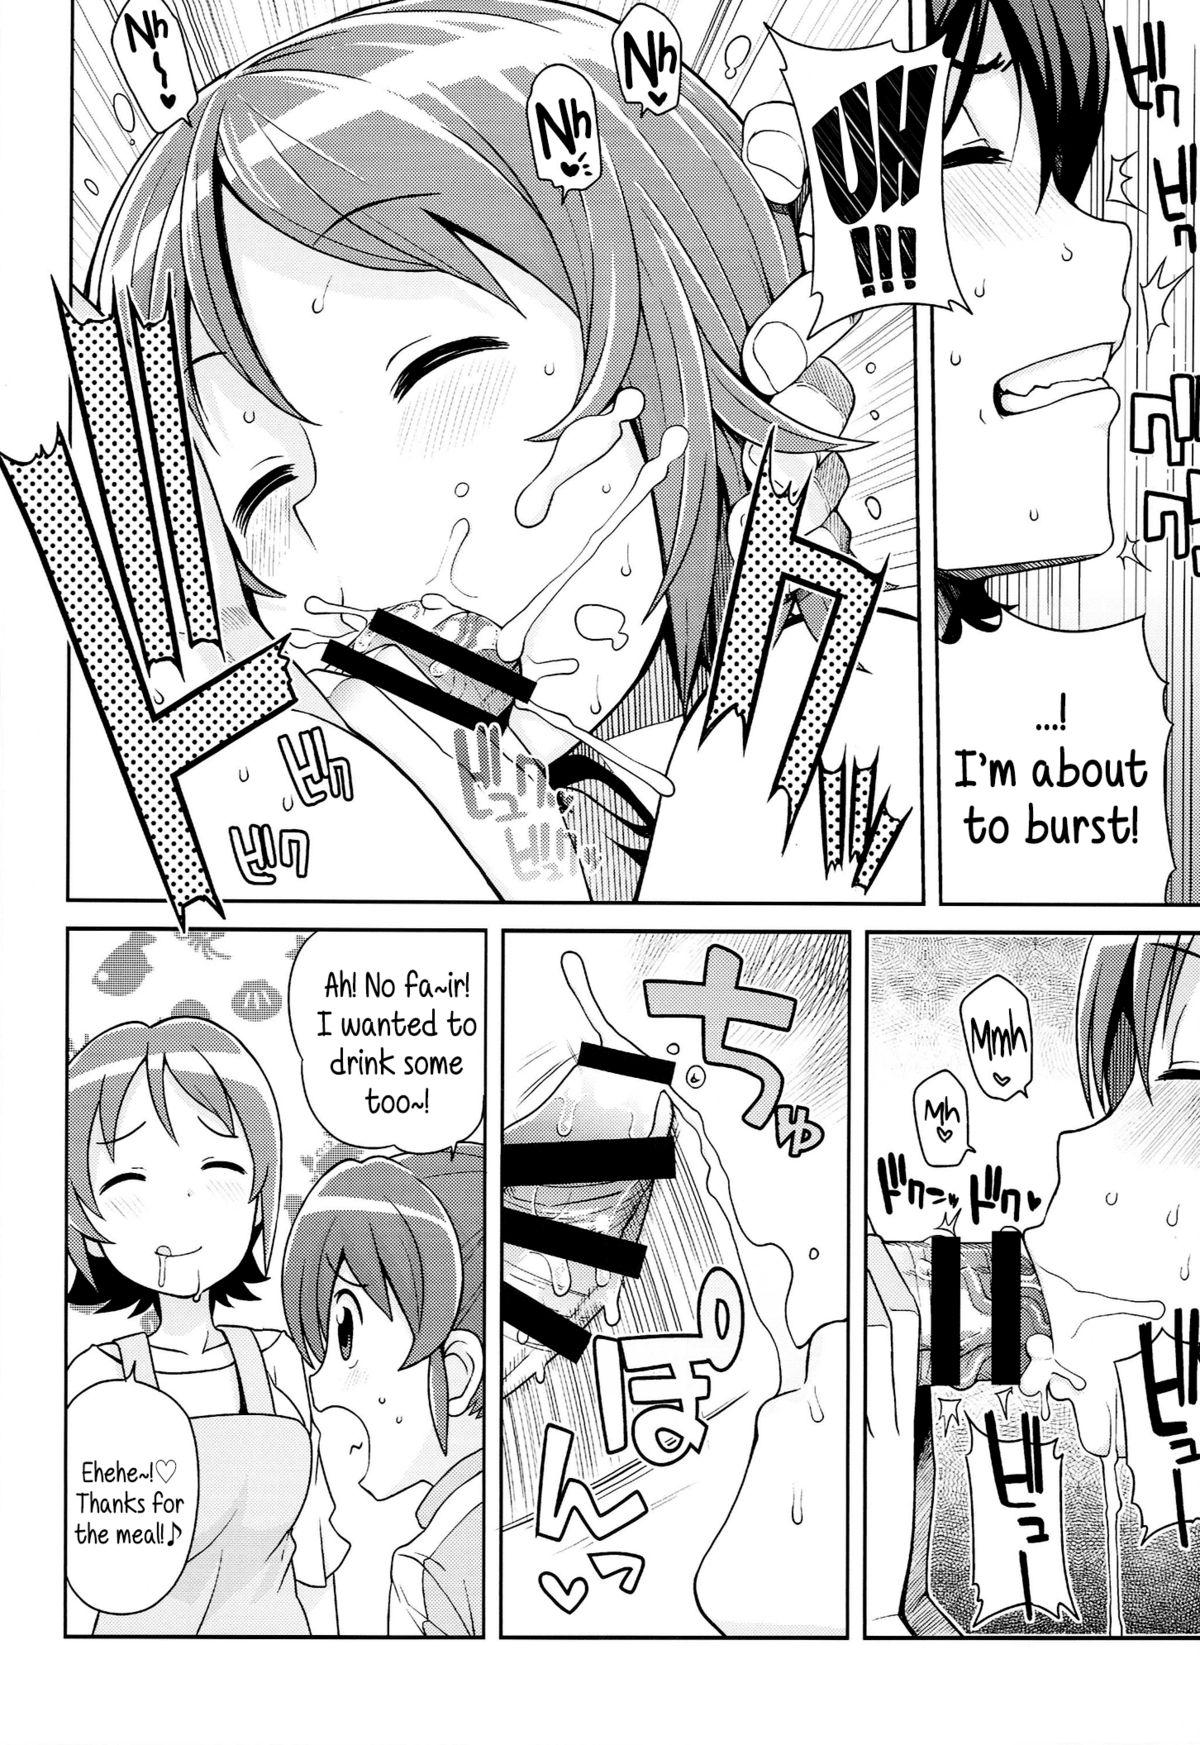 Webcamchat Chibikko Bitch Full charge - Happinesscharge precure Brother Sister - Page 9